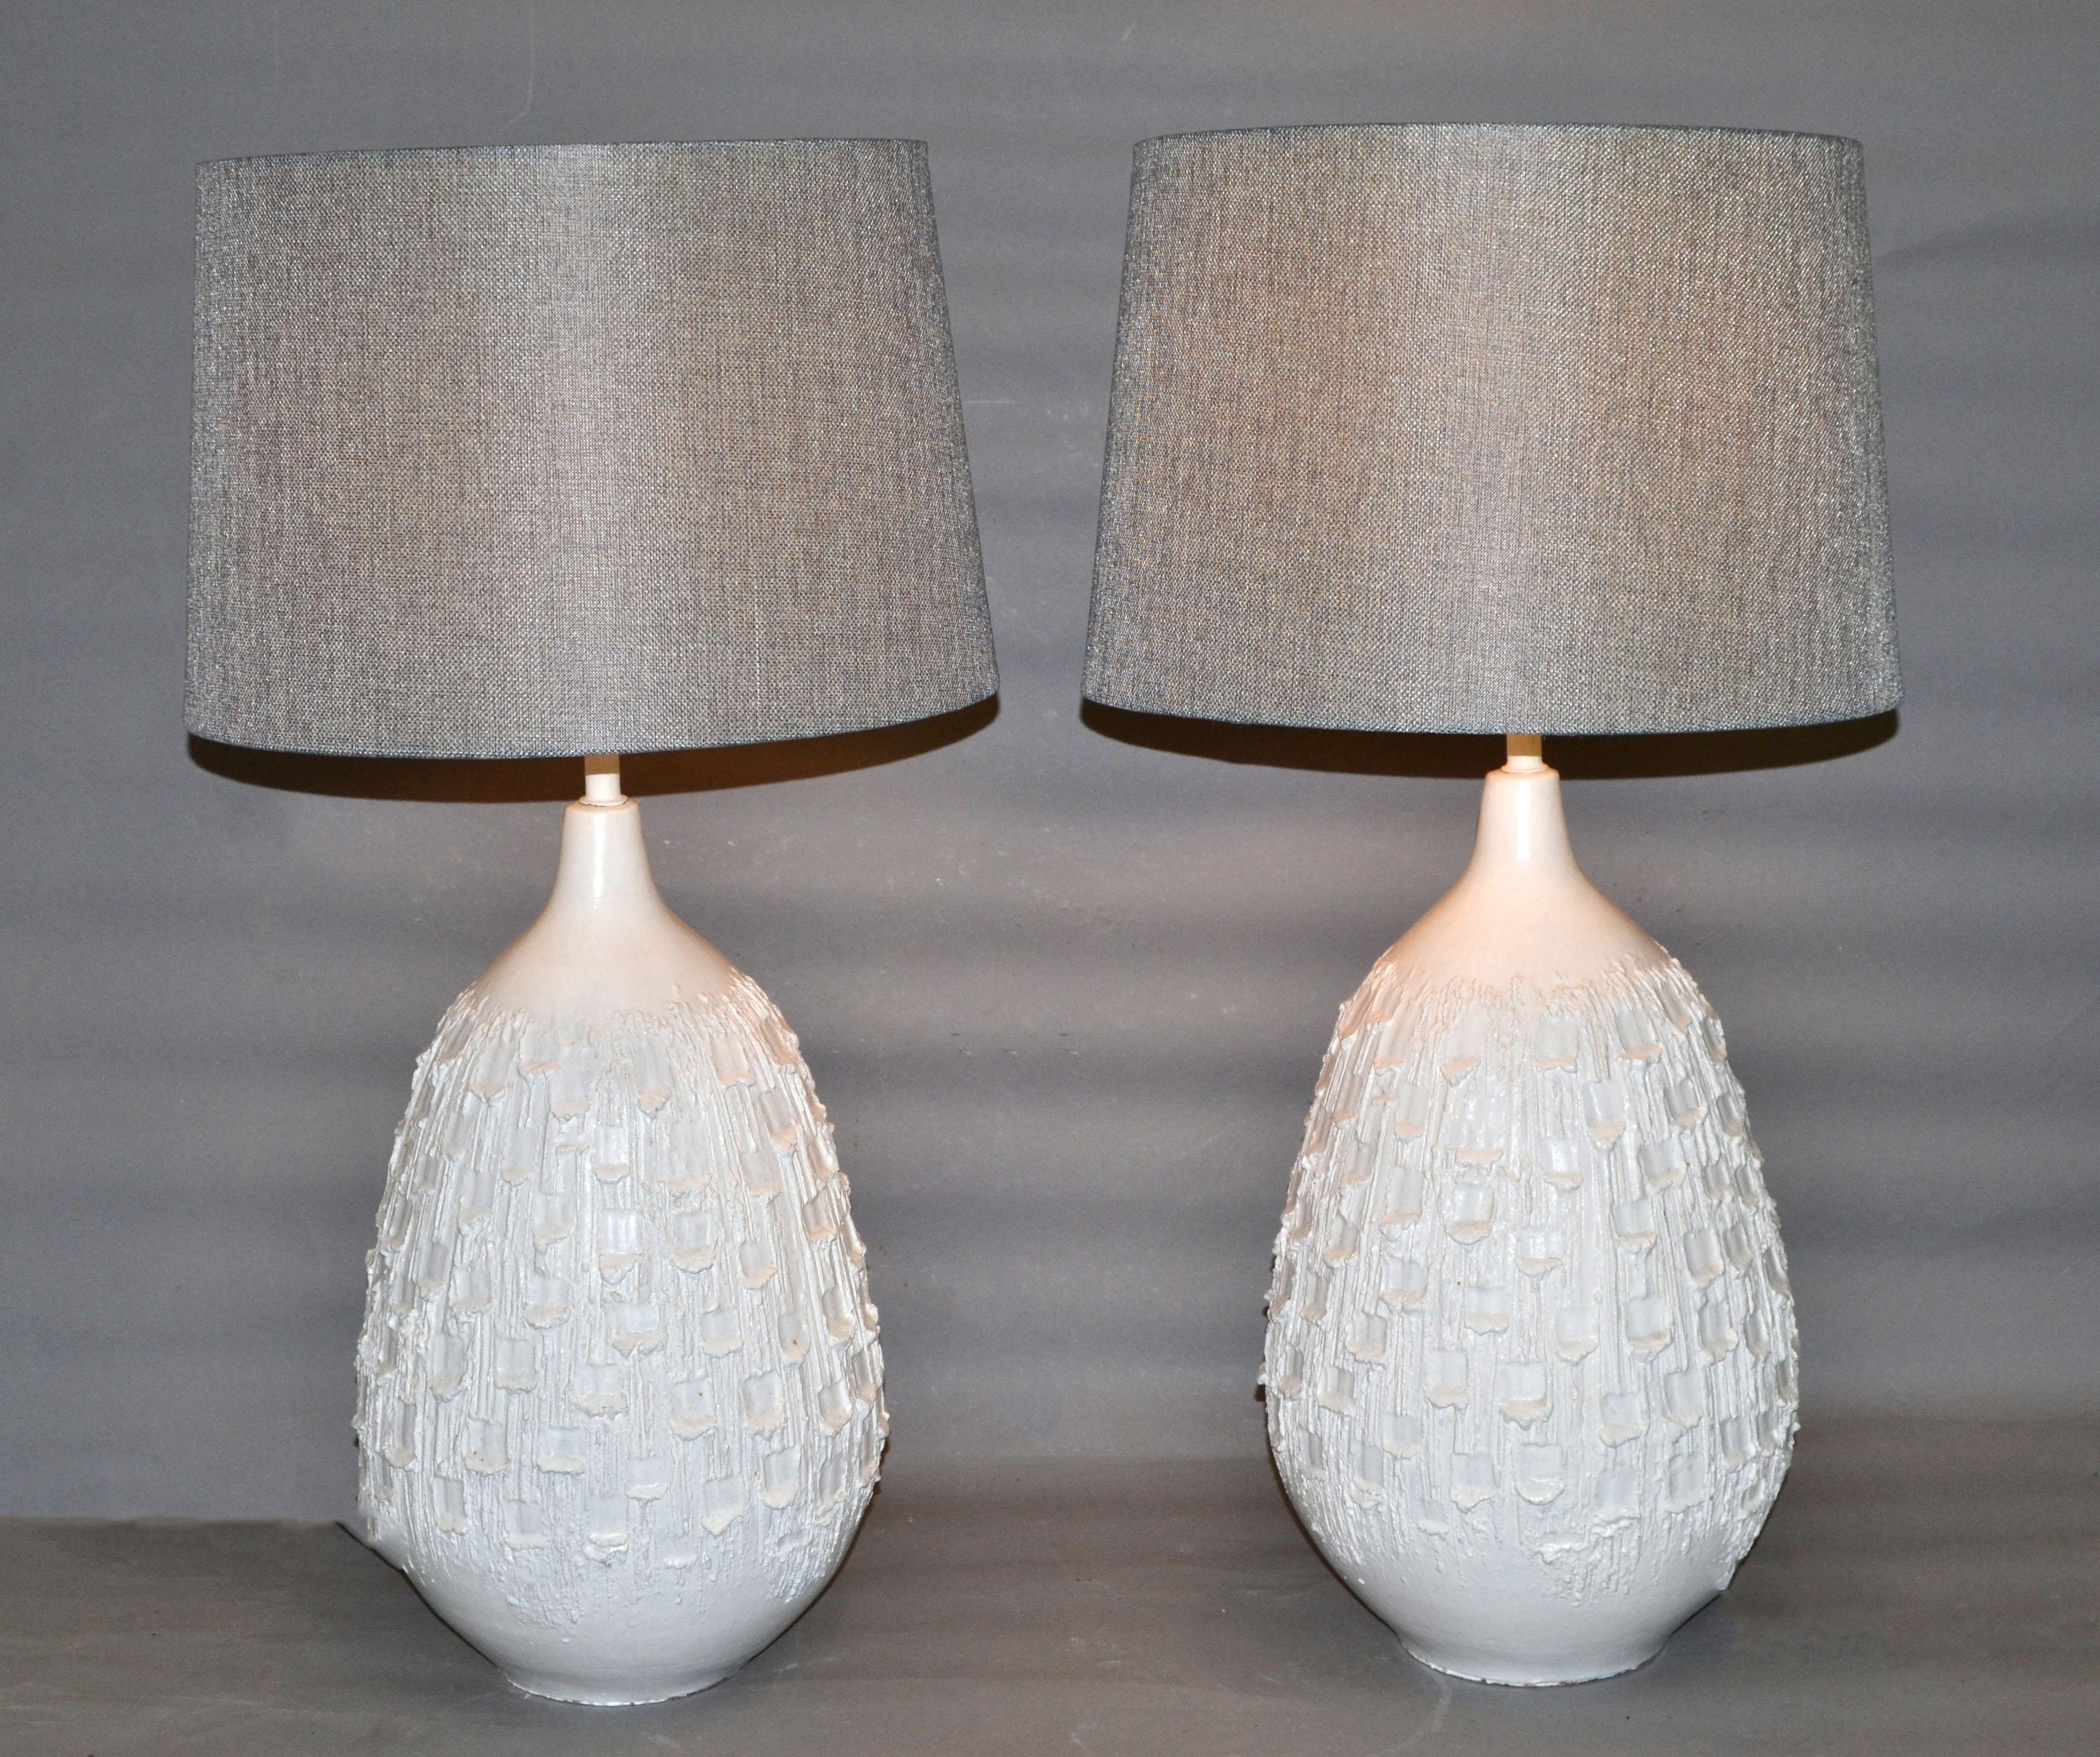 Hand-Crafted Pair of Mid-Century Modern White Ceramic Table Lamps For Sale